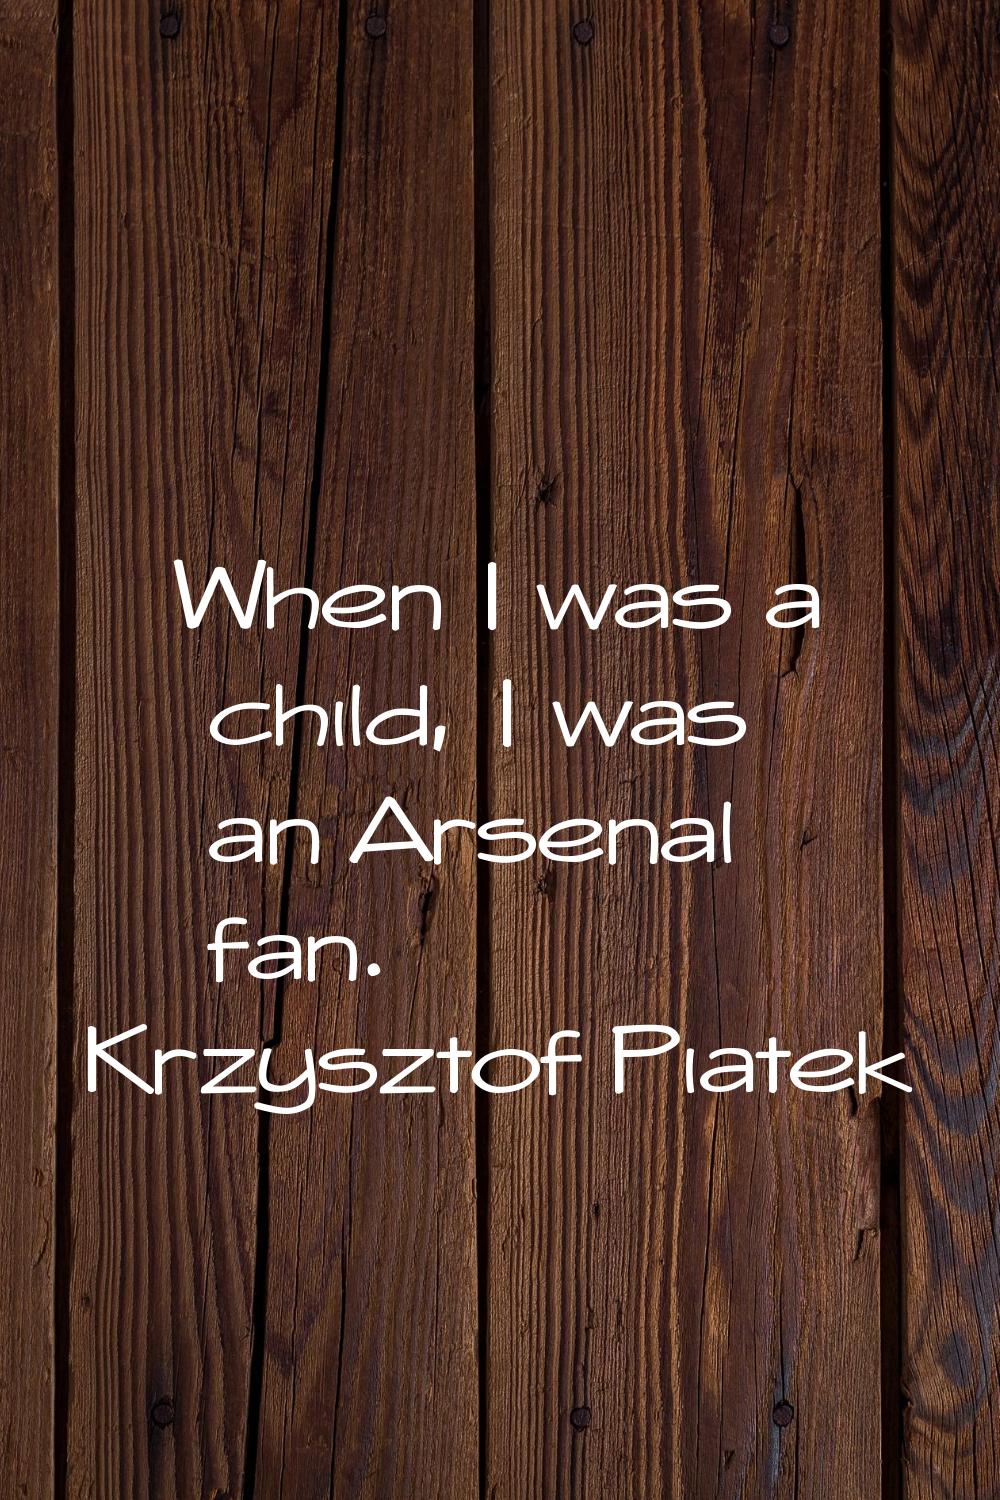 When I was a child, I was an Arsenal fan.